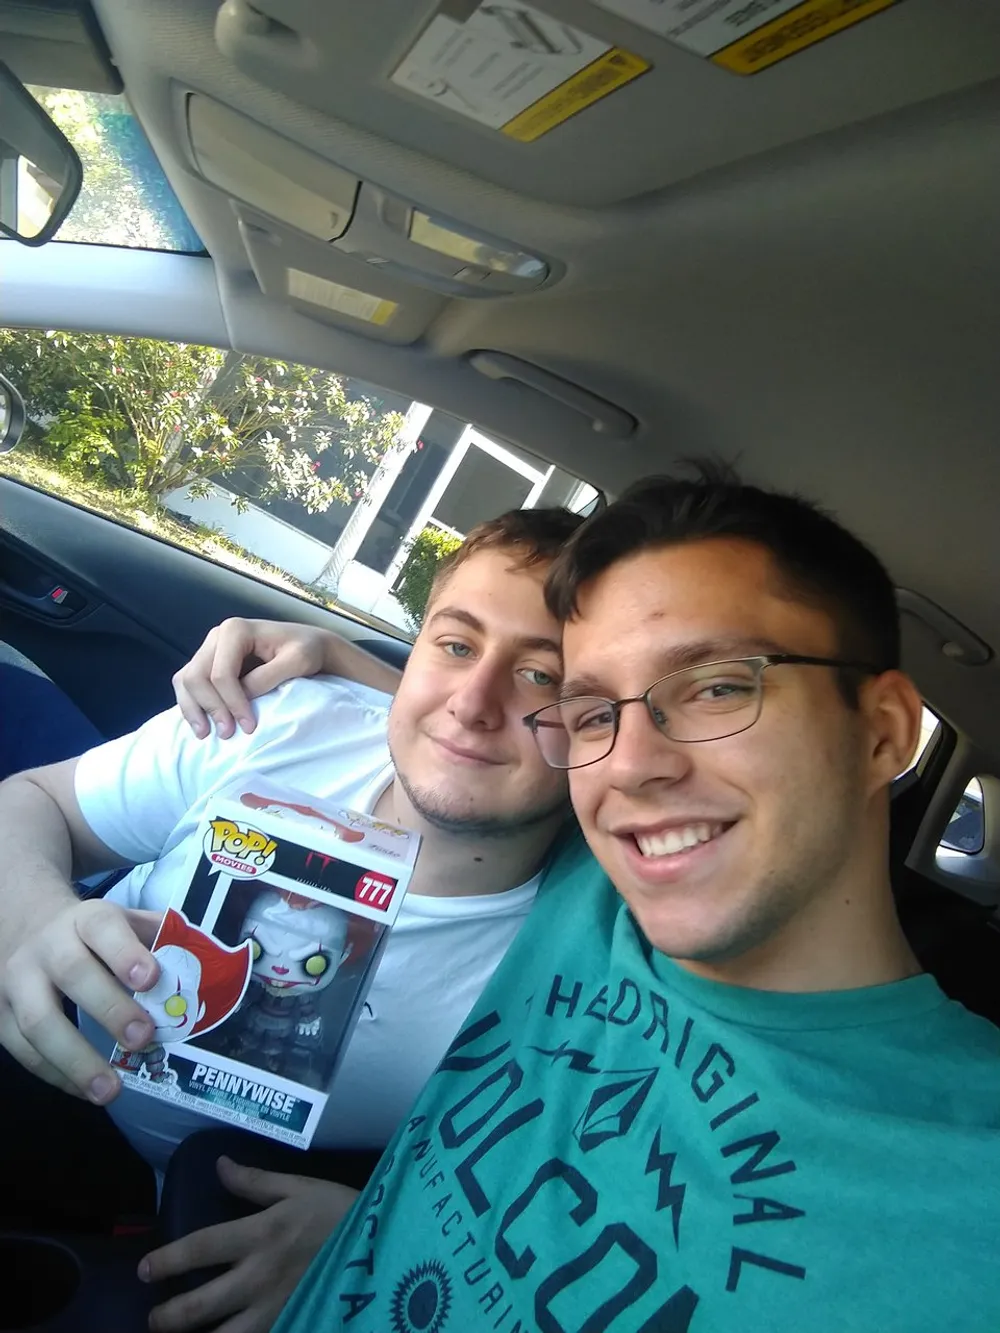 Two smiling individuals are taking a selfie in a car with one of them holding a Funko Pop figure of the character Pennywise from It